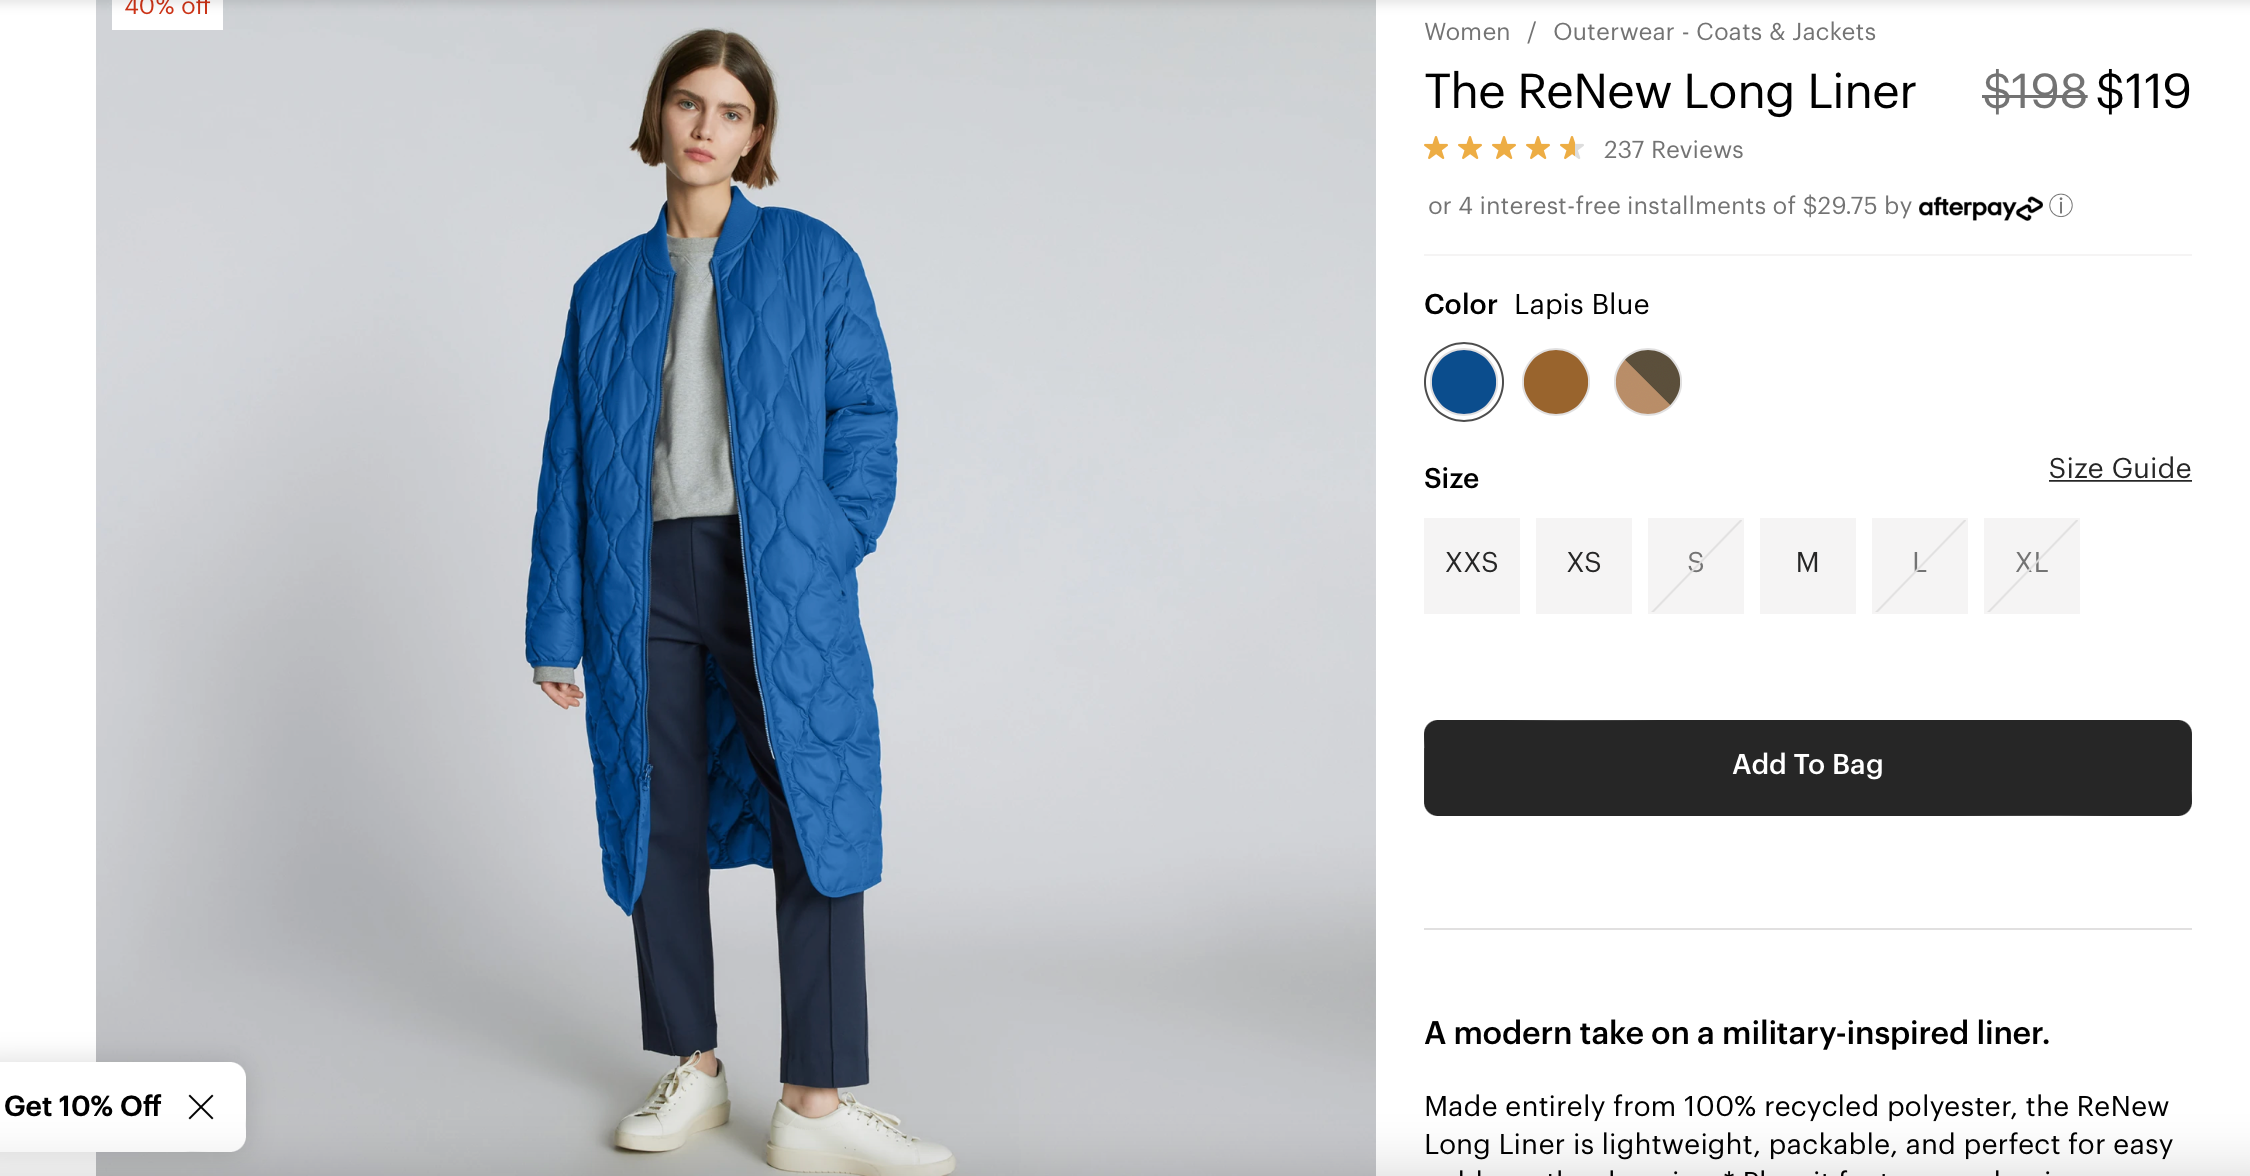 Everlane publishes transparent pricing as part of its ethical marketing strategy.